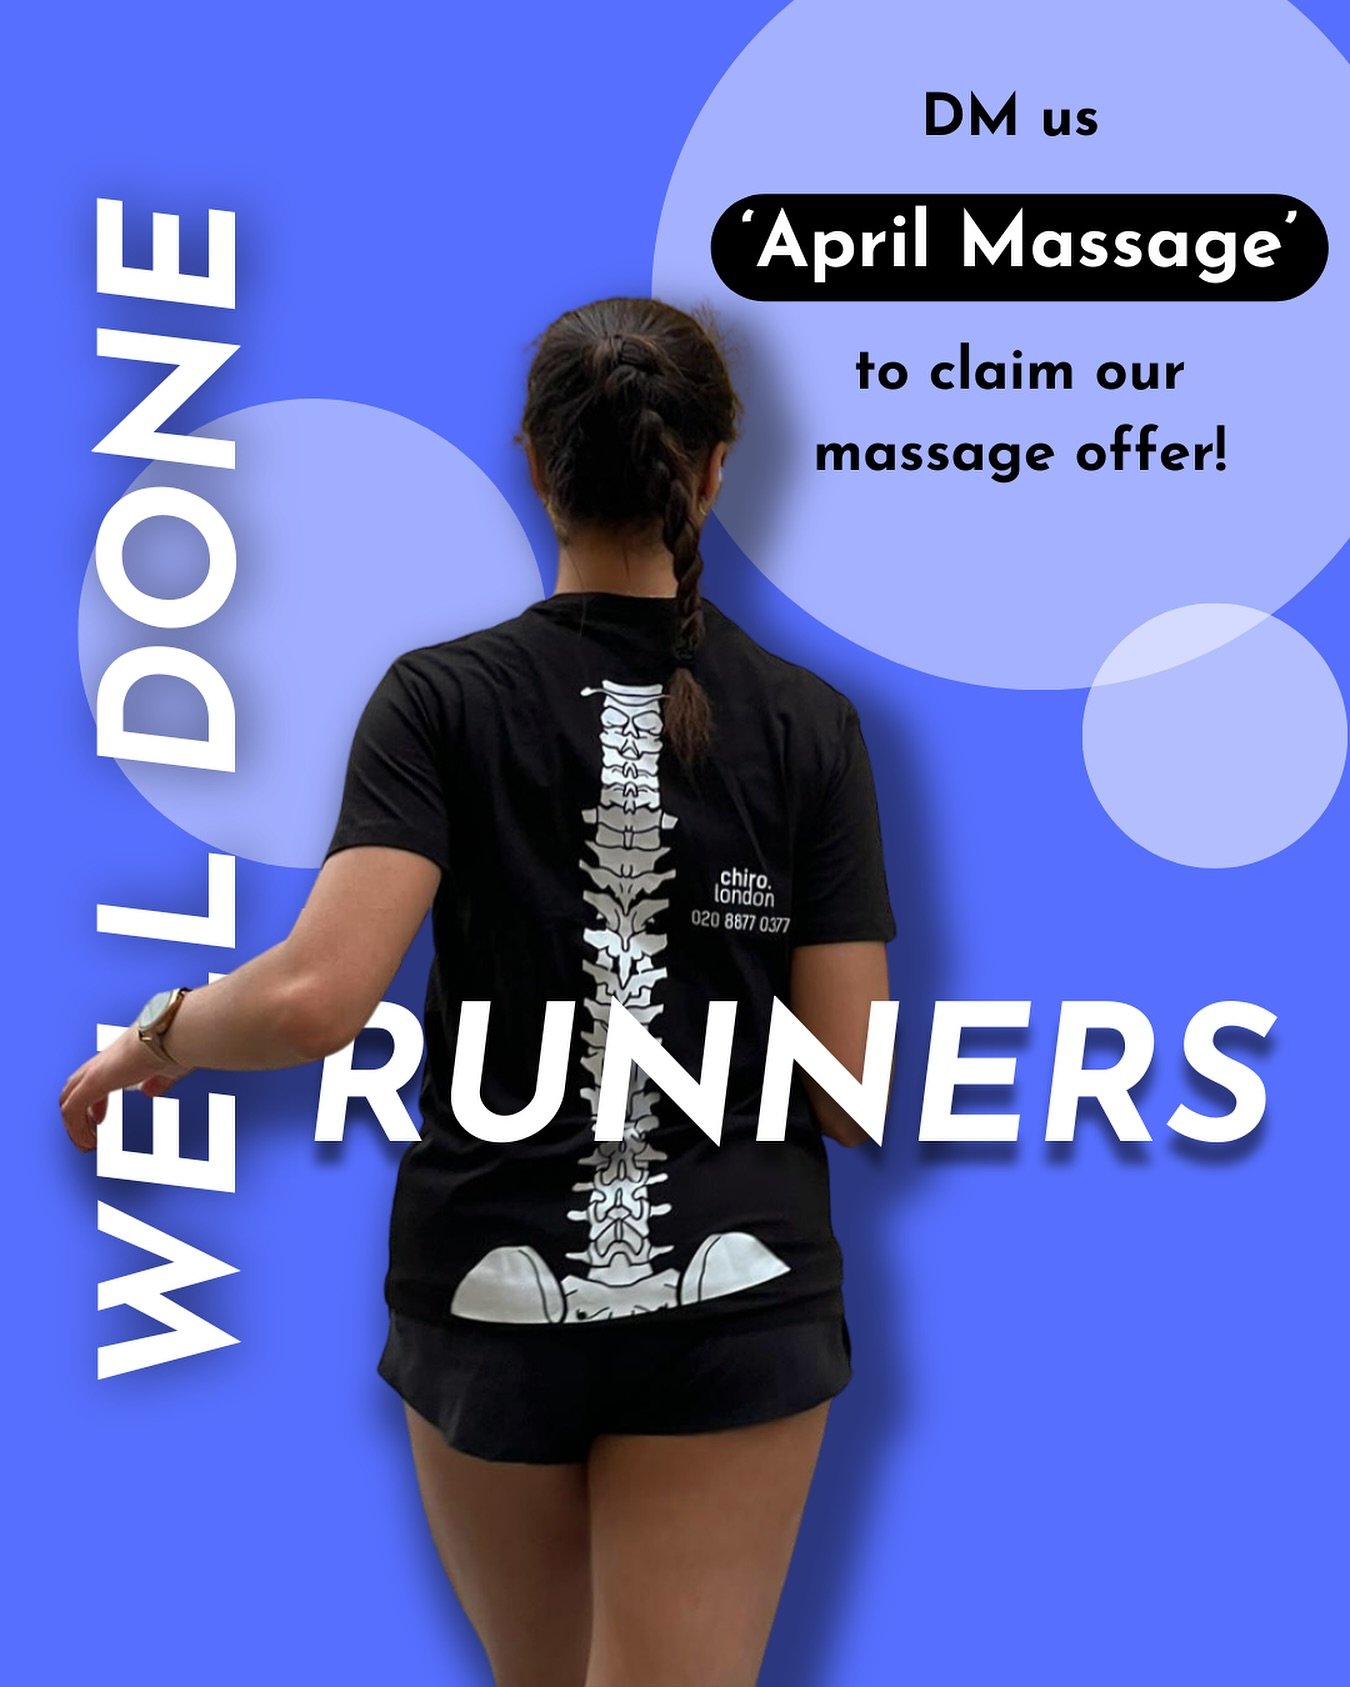 Congrats to all London Marathon finishers! 🎉

Feeling post-race aches? We&rsquo;ve got your back..

Don&rsquo;t miss out on our limited-time massage offer with 8 days left to book! 

DM us &lsquo;AprilMassage&rsquo; for details. 💌

#londonmarathon 